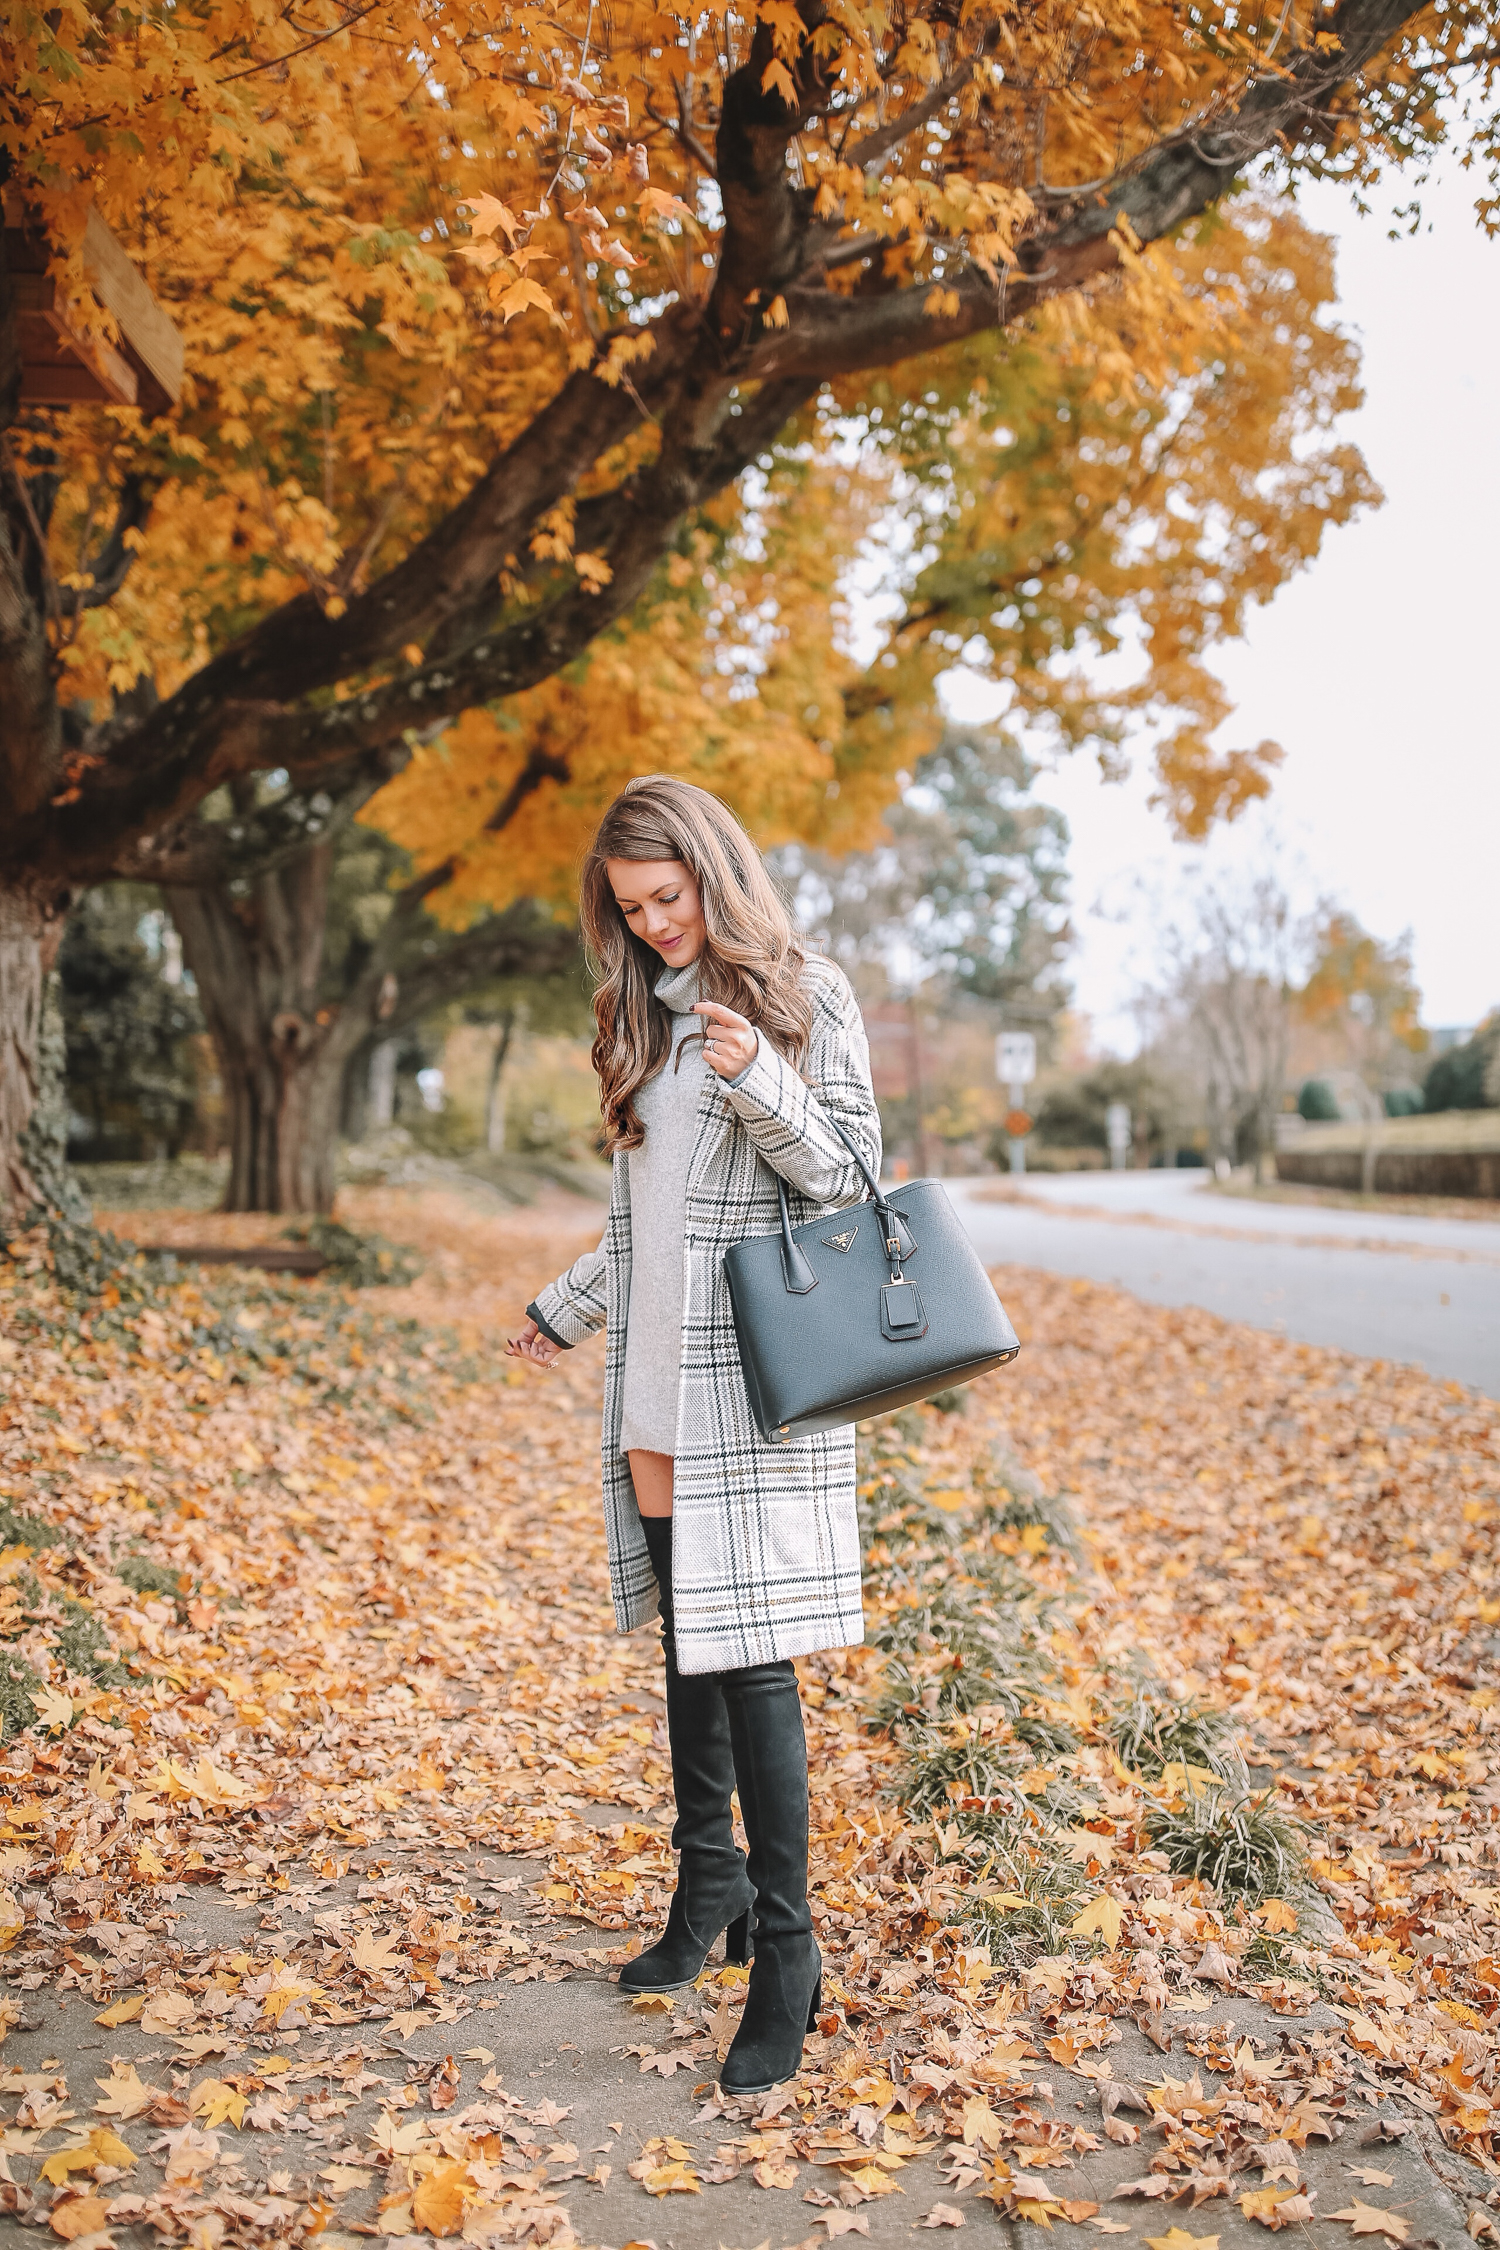 Classic Fall Staples To Add To Your Closet - Cyndi Spivey